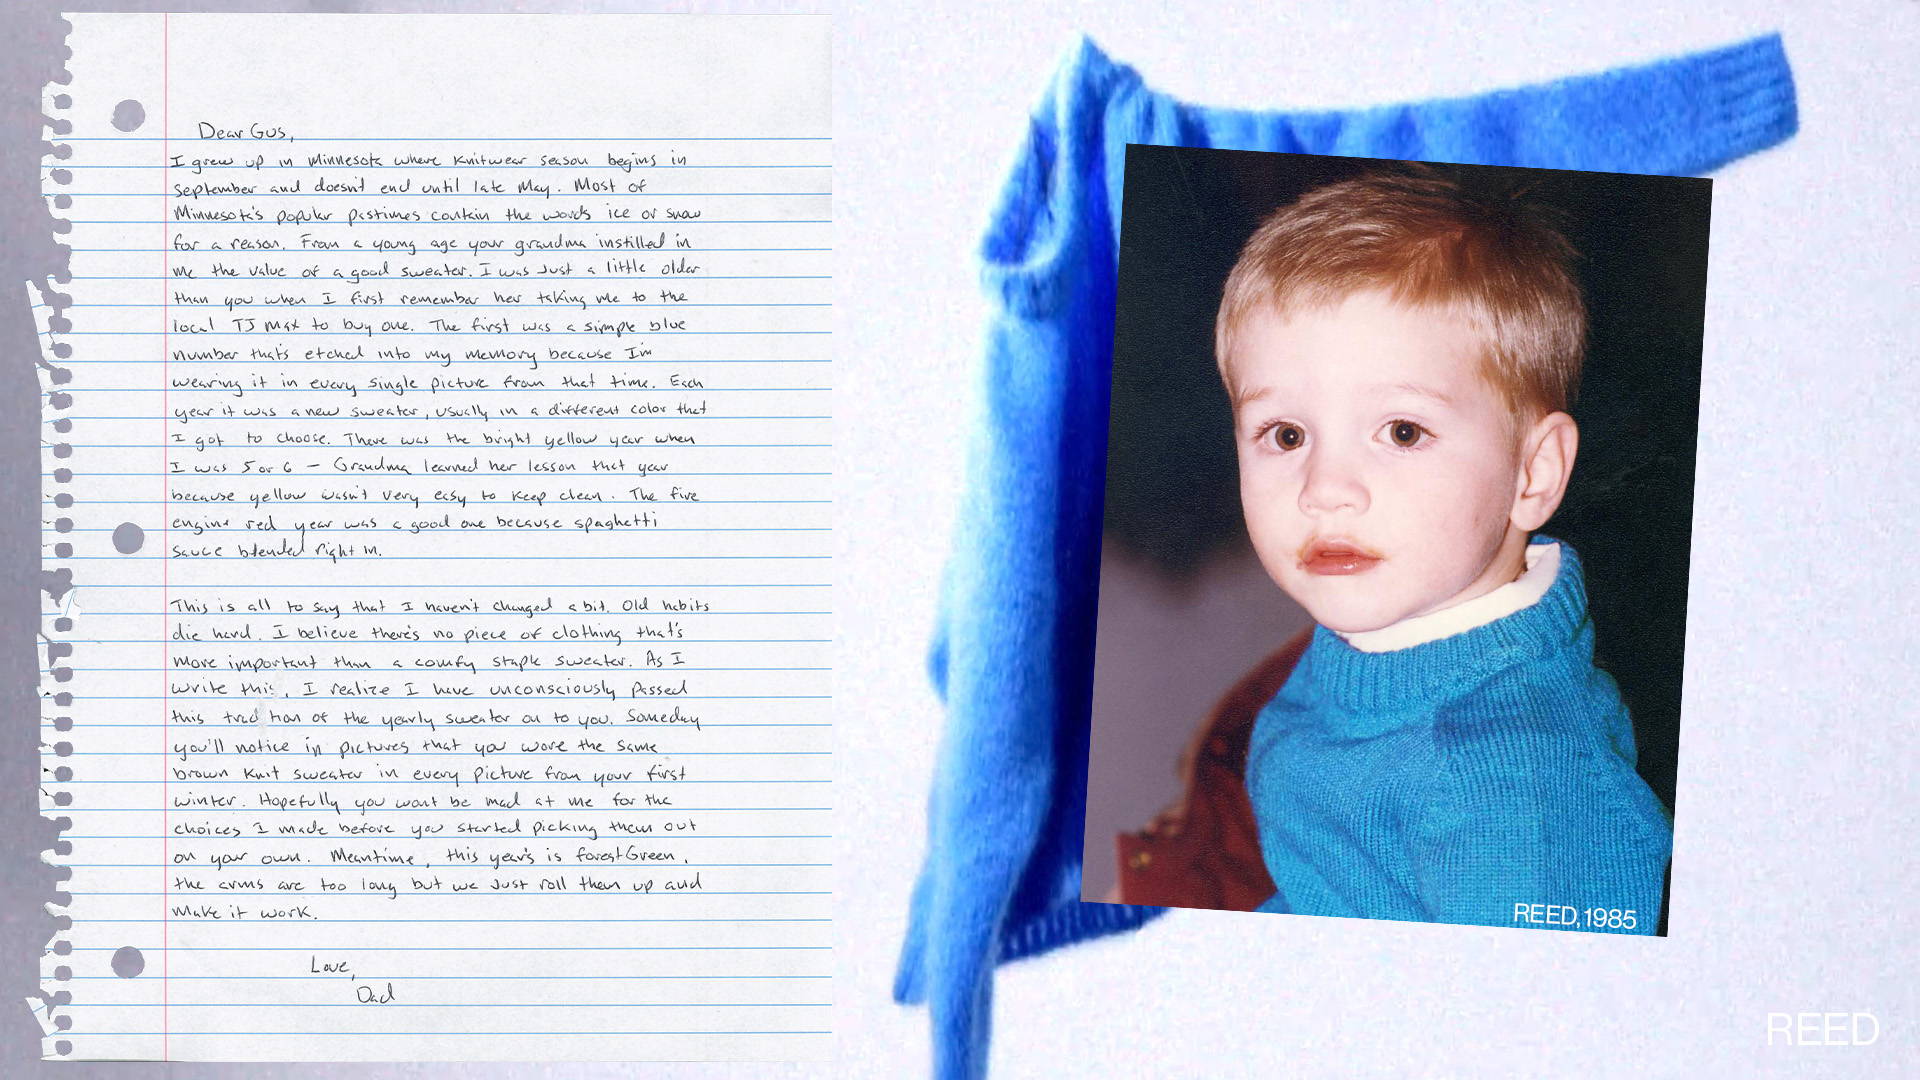 collage of letter and photo of young child in blue sweater